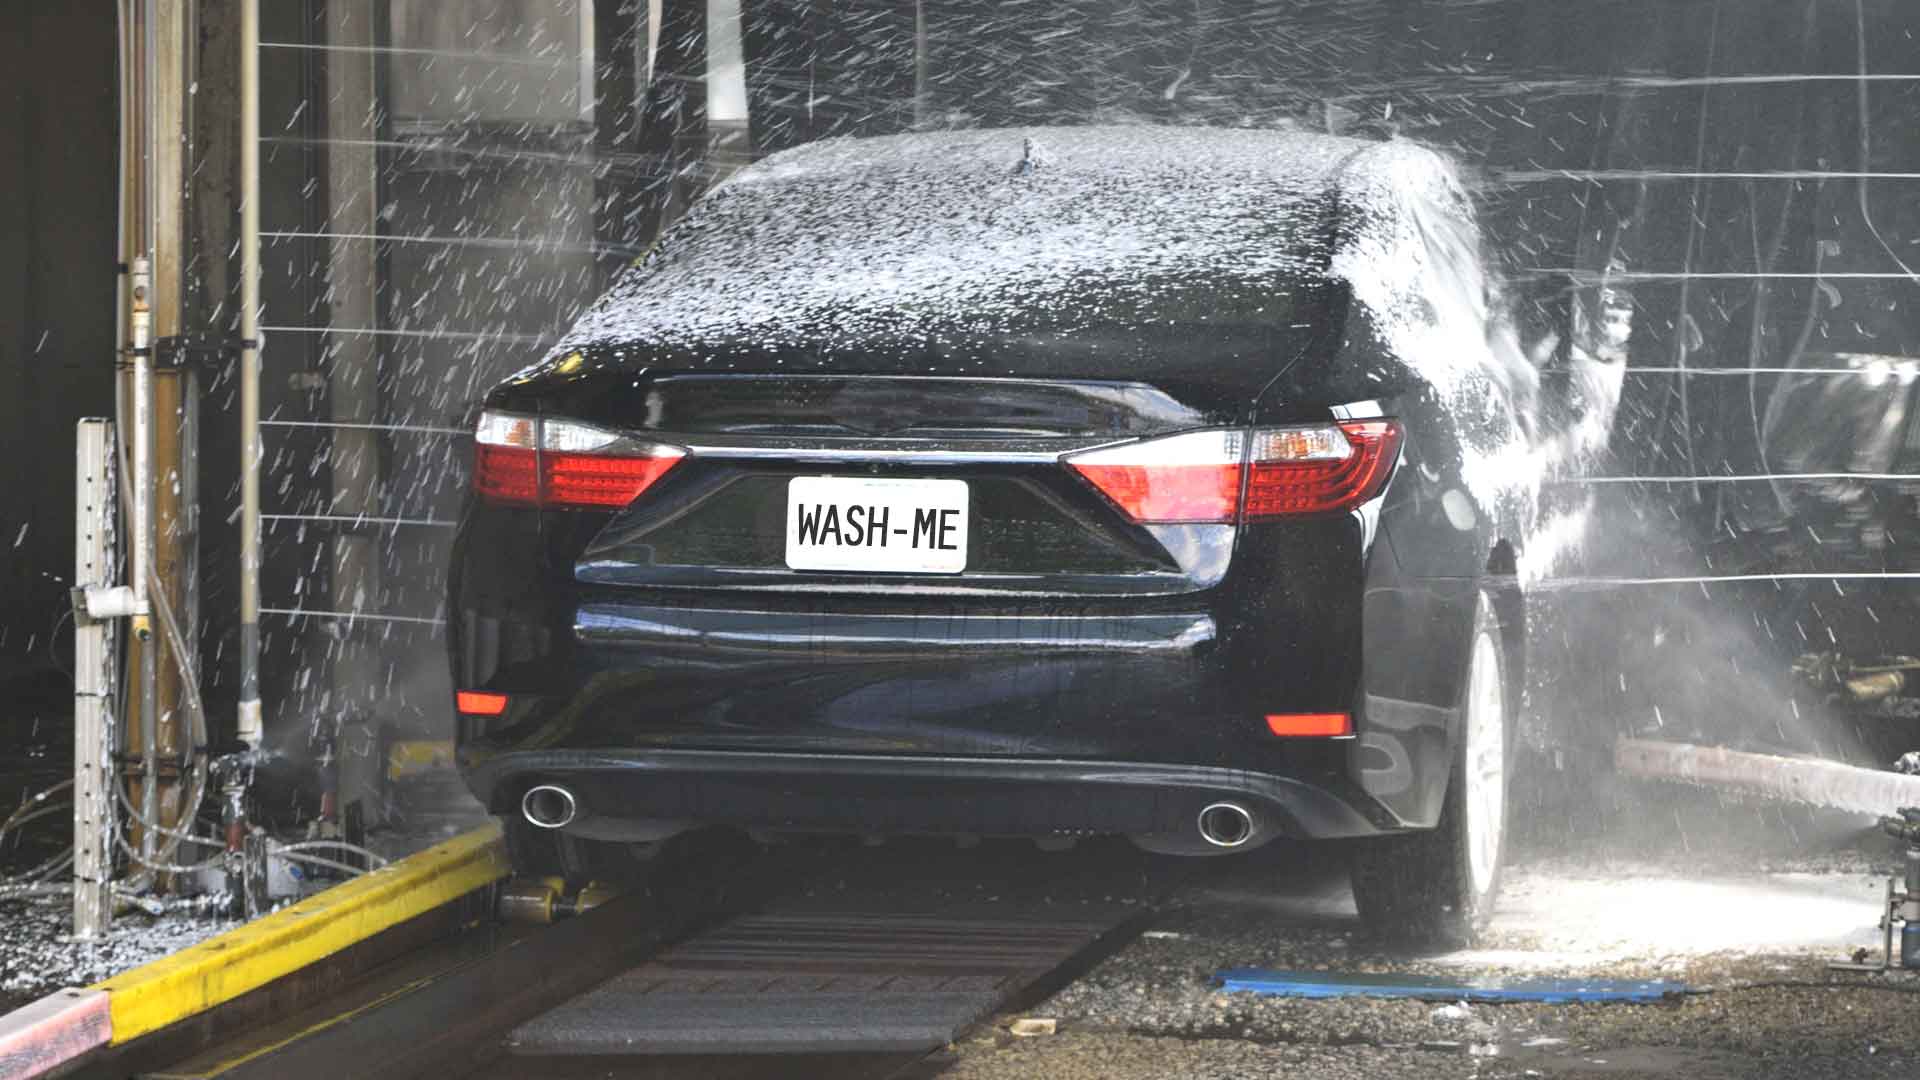 Water Cannon Let's You Help Clean Your Car at The Car Wash